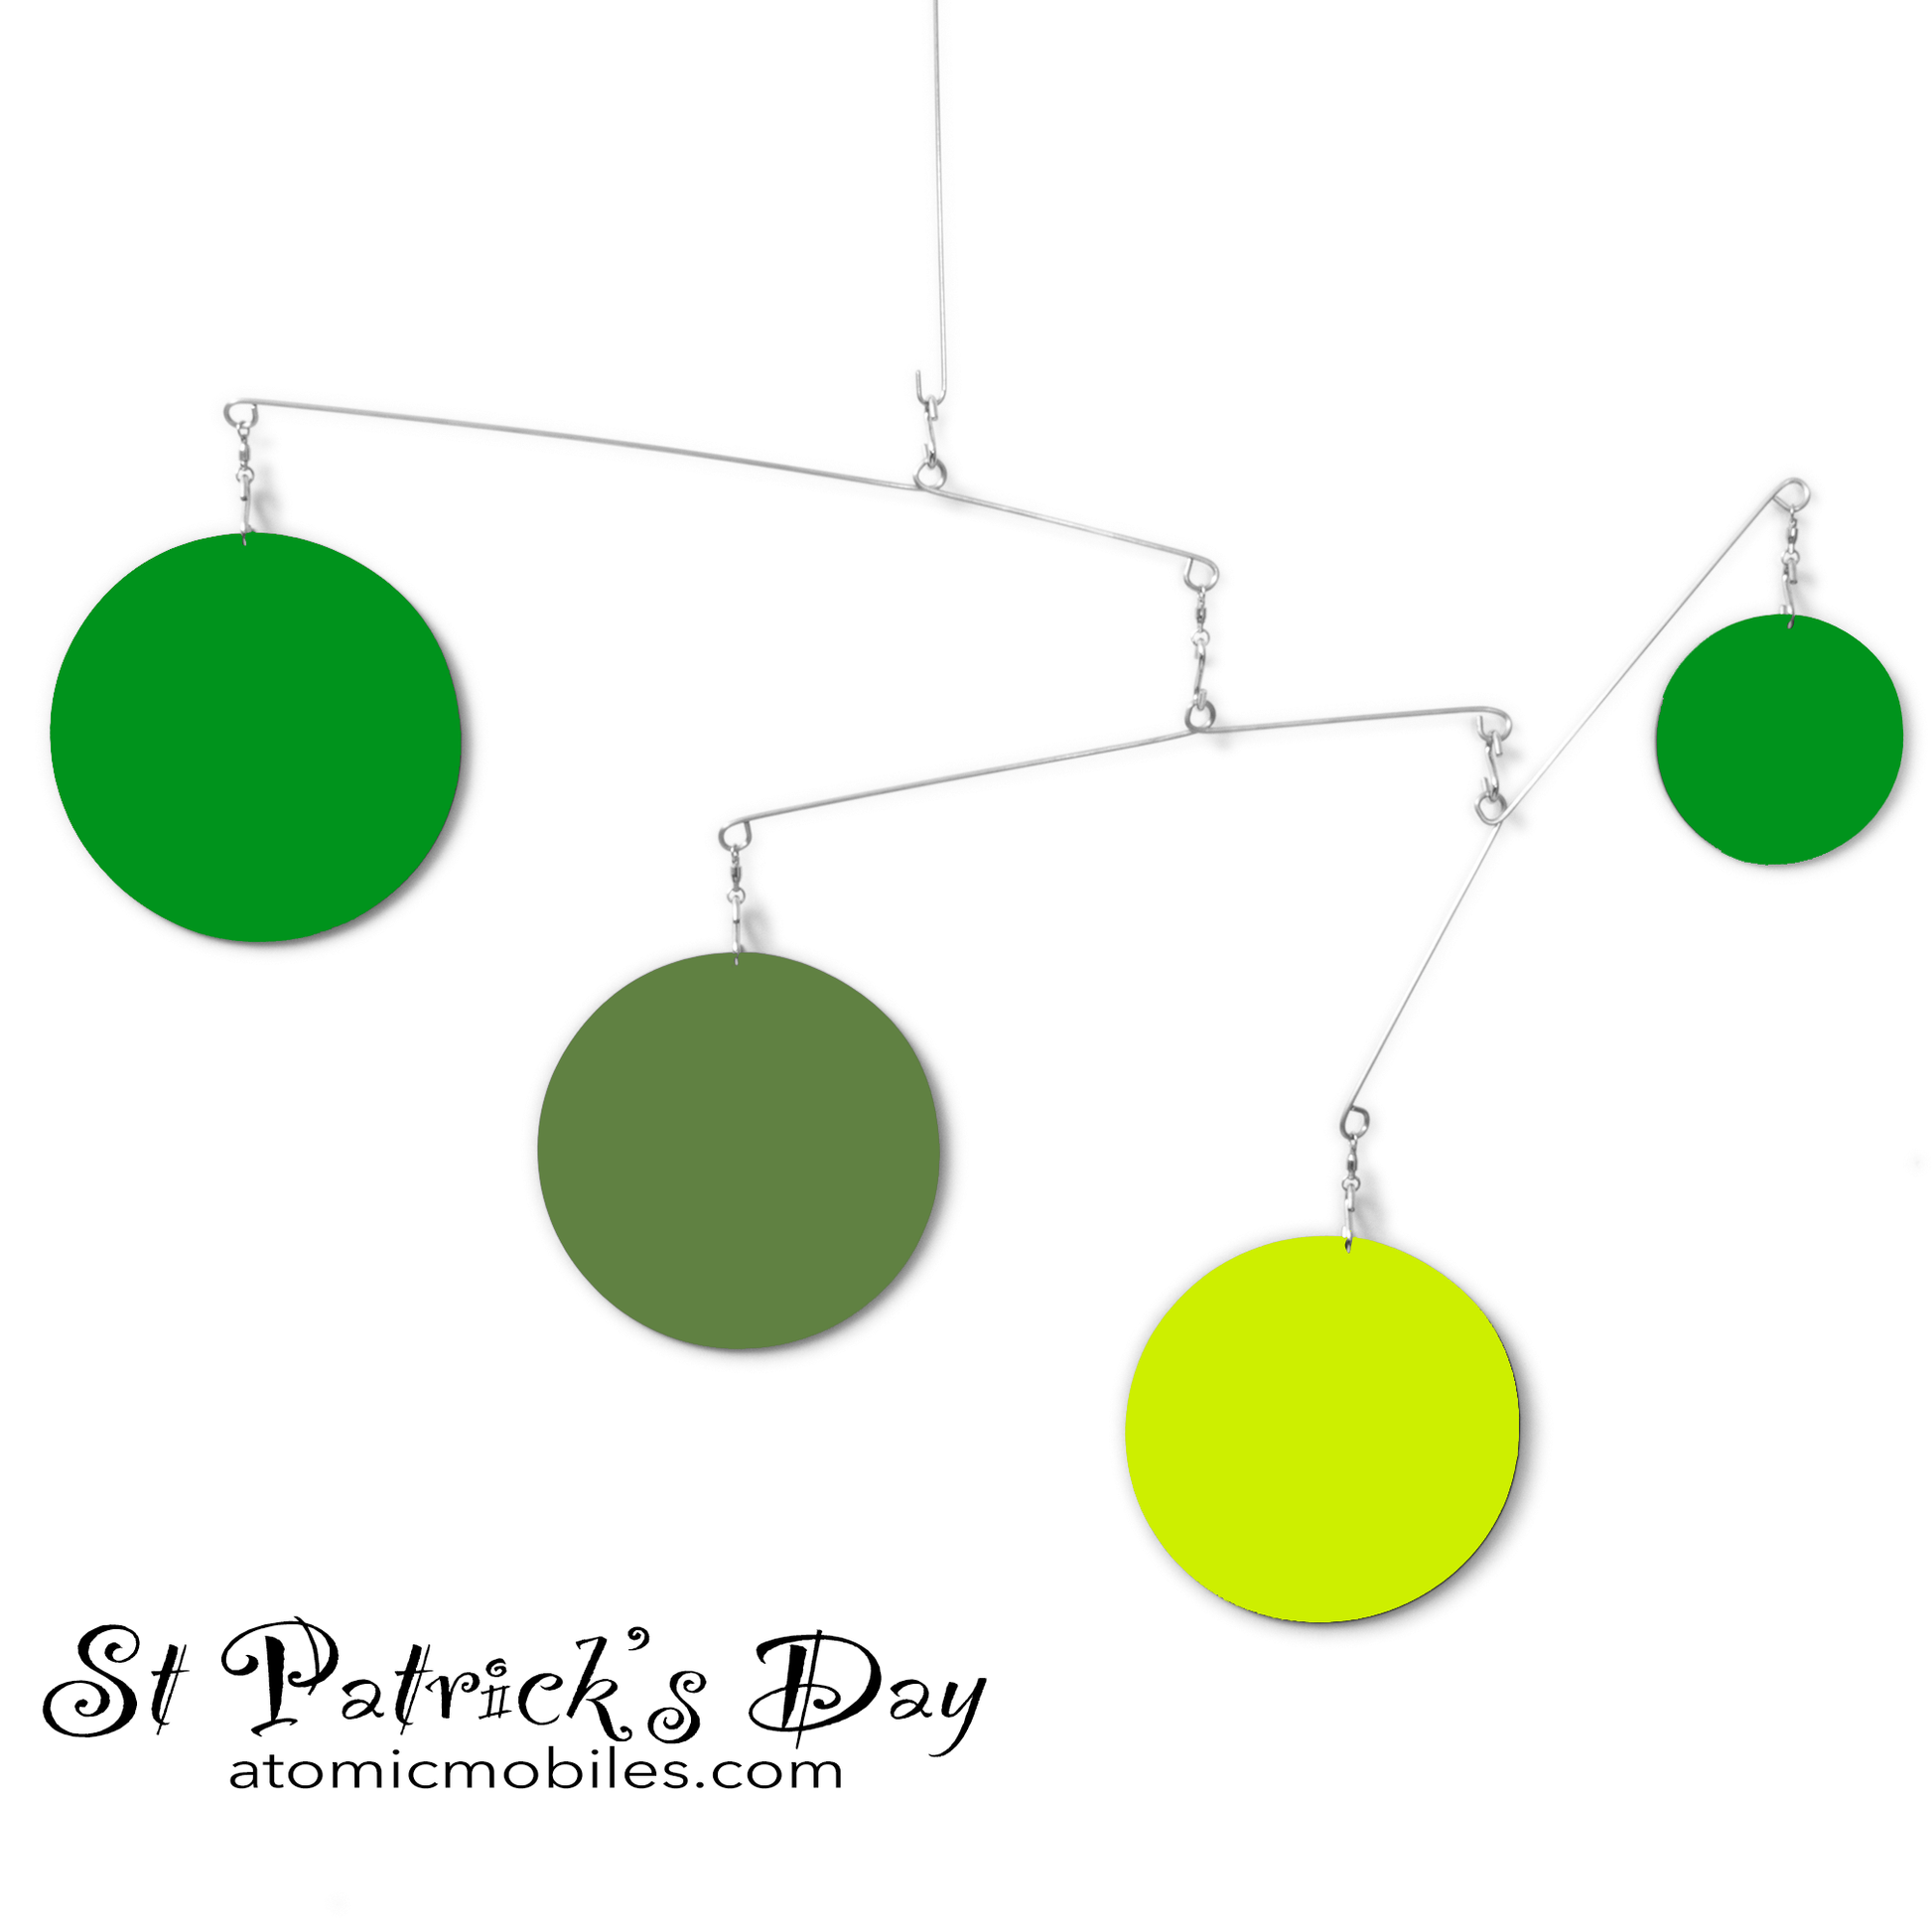 Unique St Patrick's Day Decoration - kinetic hanging art mobile in St Patrick's Day colors of Green, Olive Green, Lime Green, and Green by AtomicMobiles.com